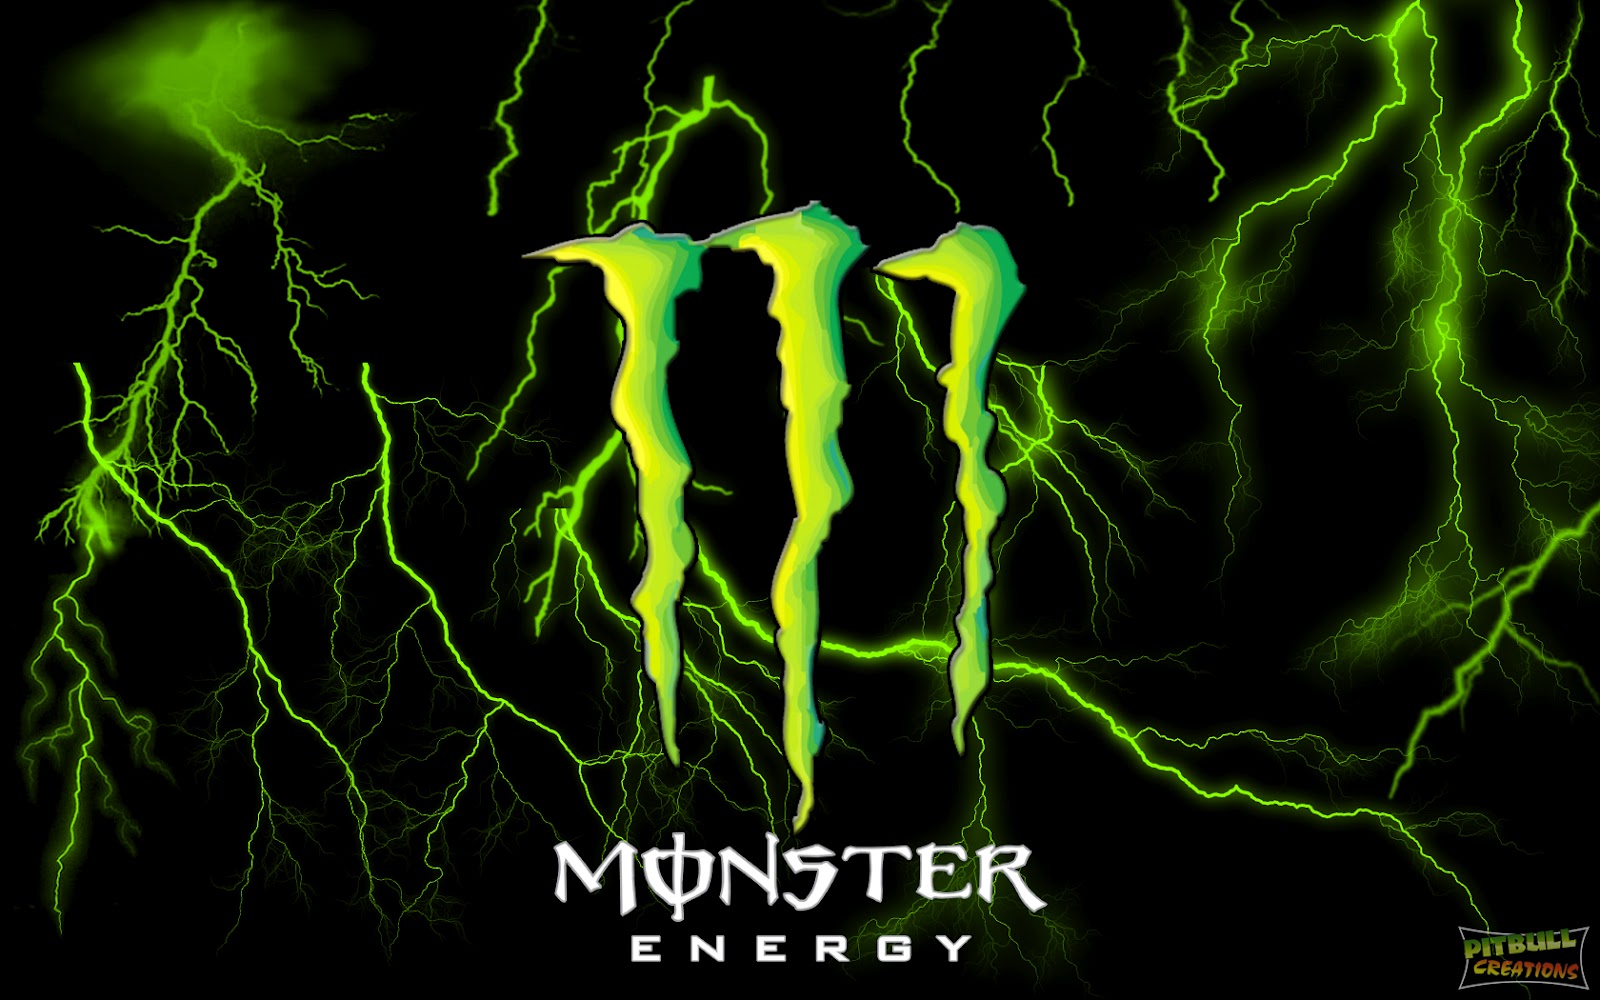 Download this Energy Drink Logos picture